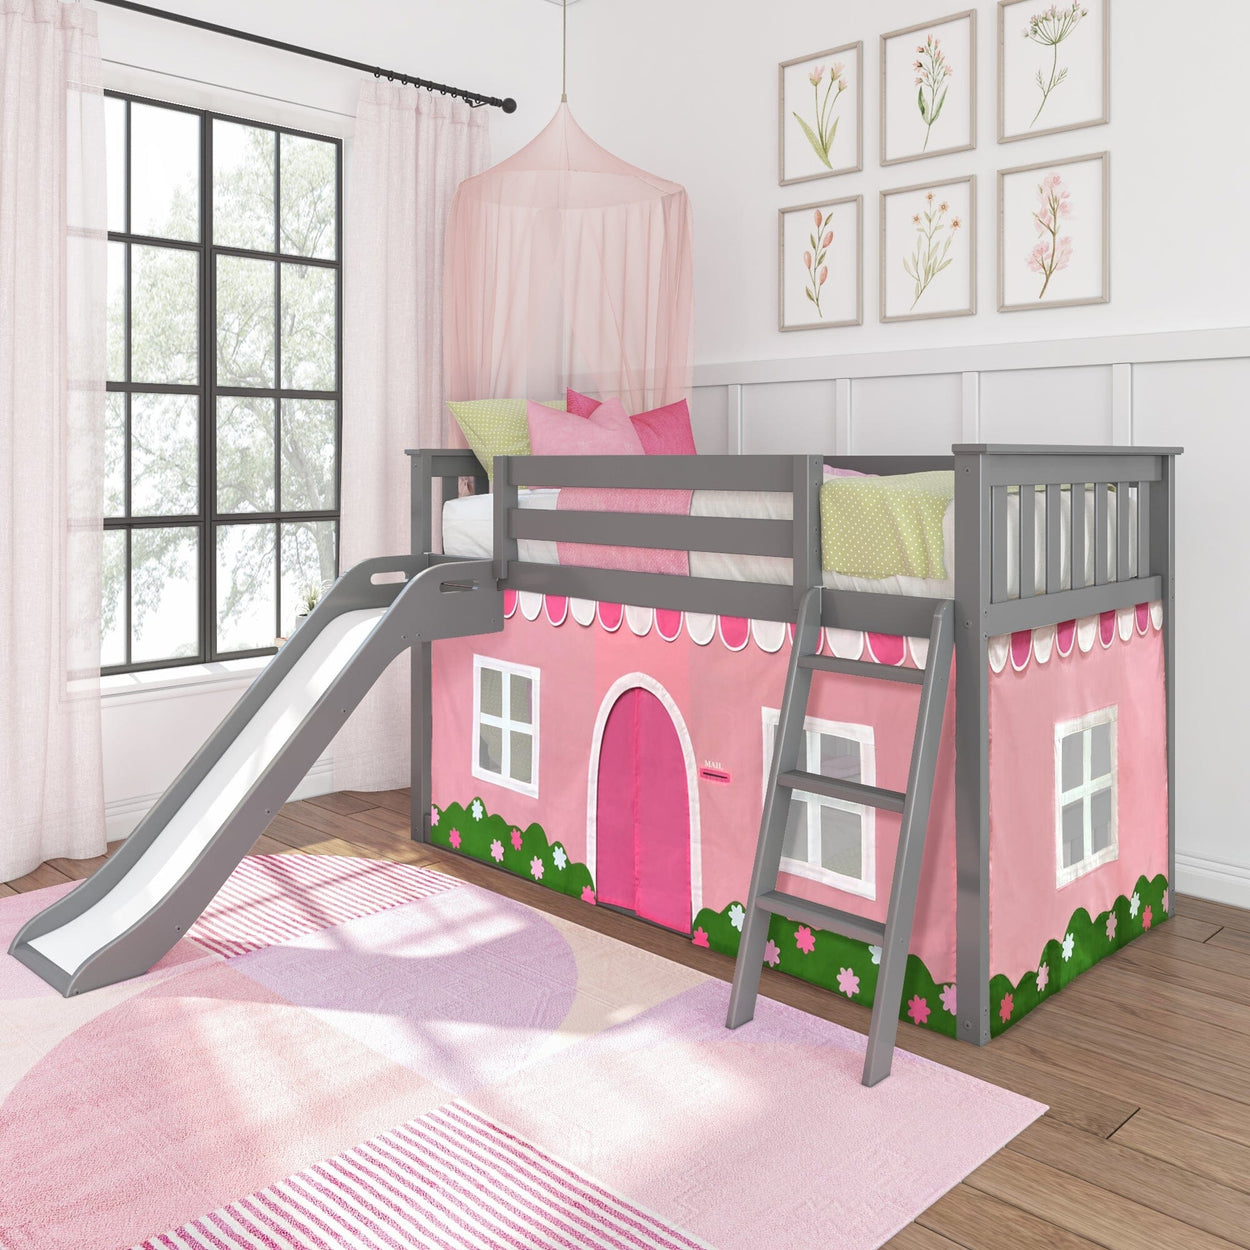 180417121064 : Bunk Beds Low Bunk with Easy Slide and Light Pink and White Farmhouse Curtain, Grey